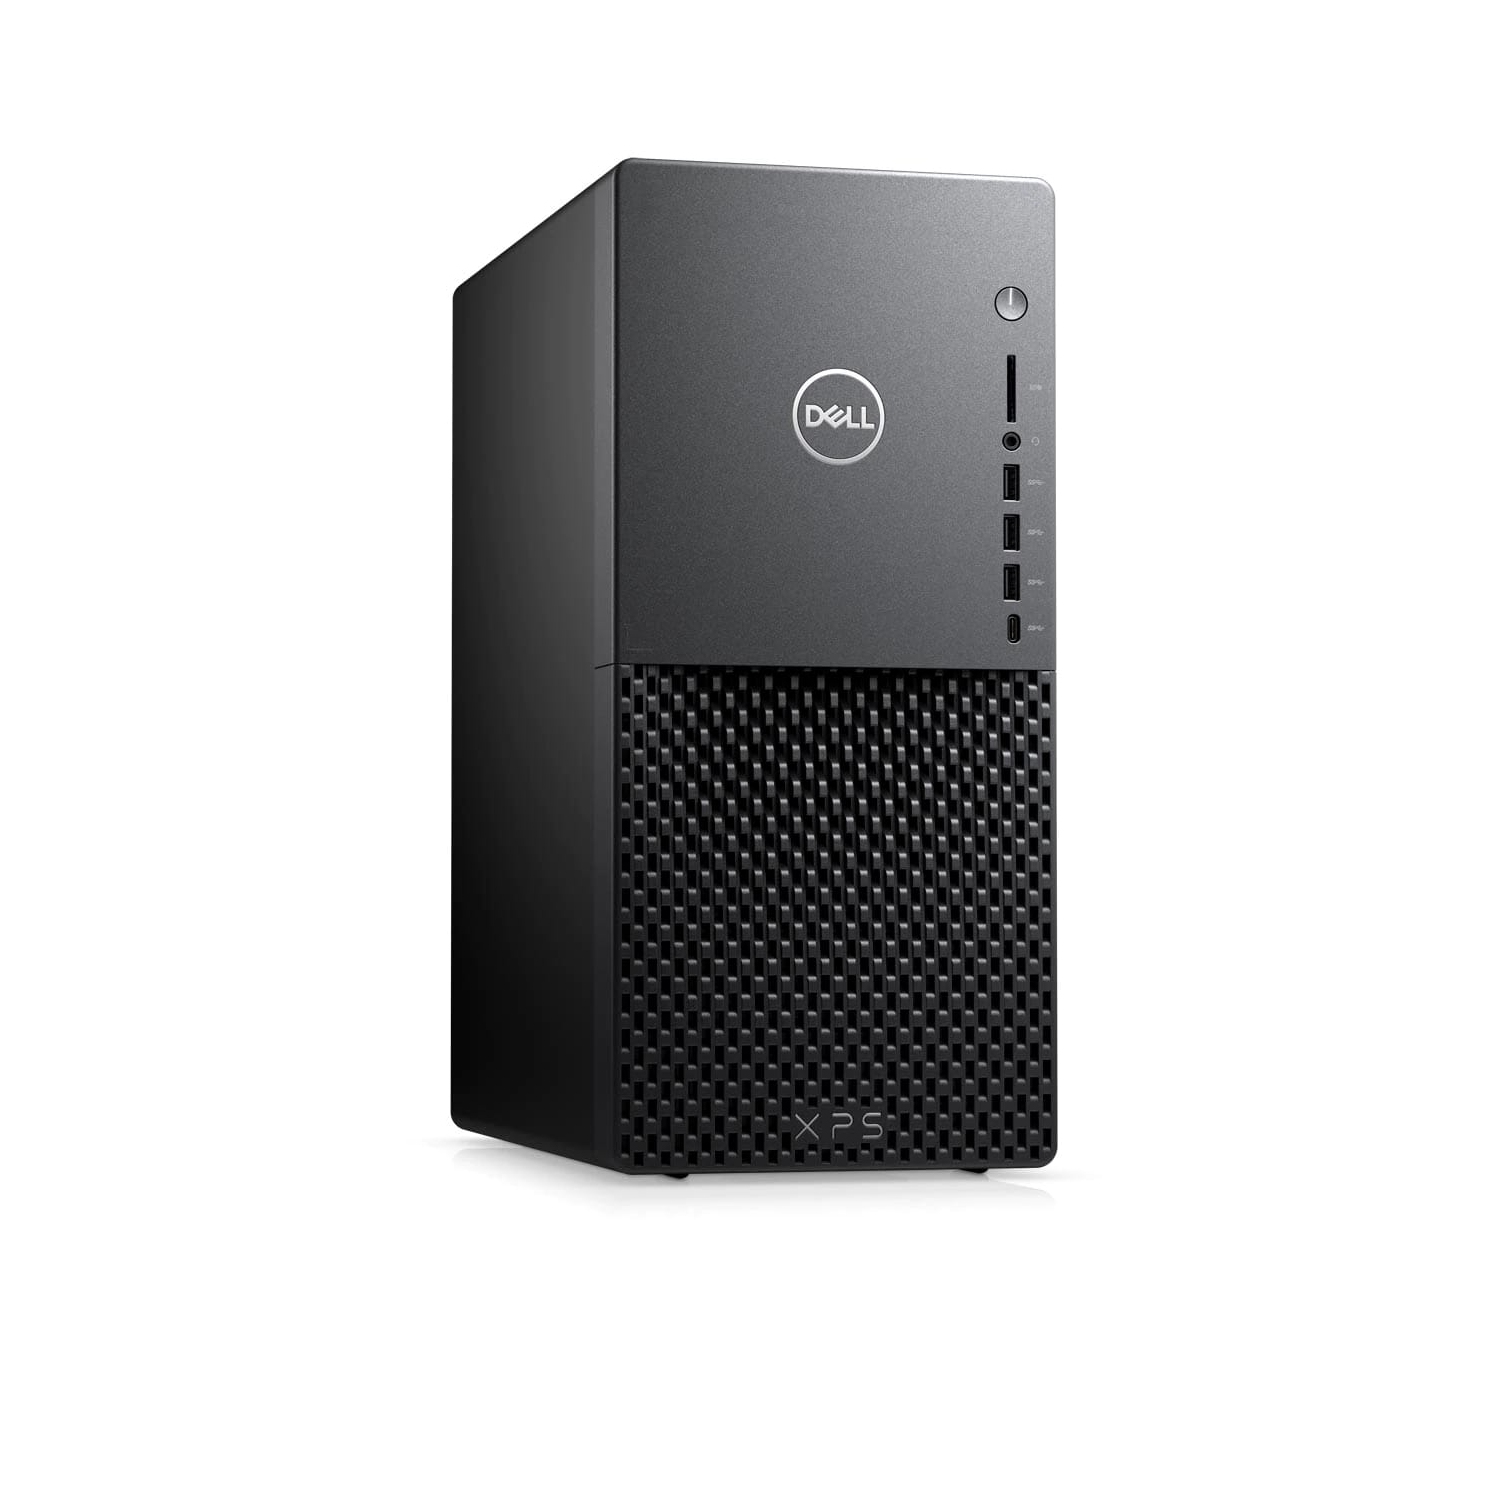 Refurbished (Excellent) - Dell XPS 8940 Desktop (2020) | Core i7 - 1TB SSD + 1TB HDD - 32GB RAM - 3060 Ti | 8 Cores @ 4.9 GHz - 11th Gen CPU Certified Refurbished